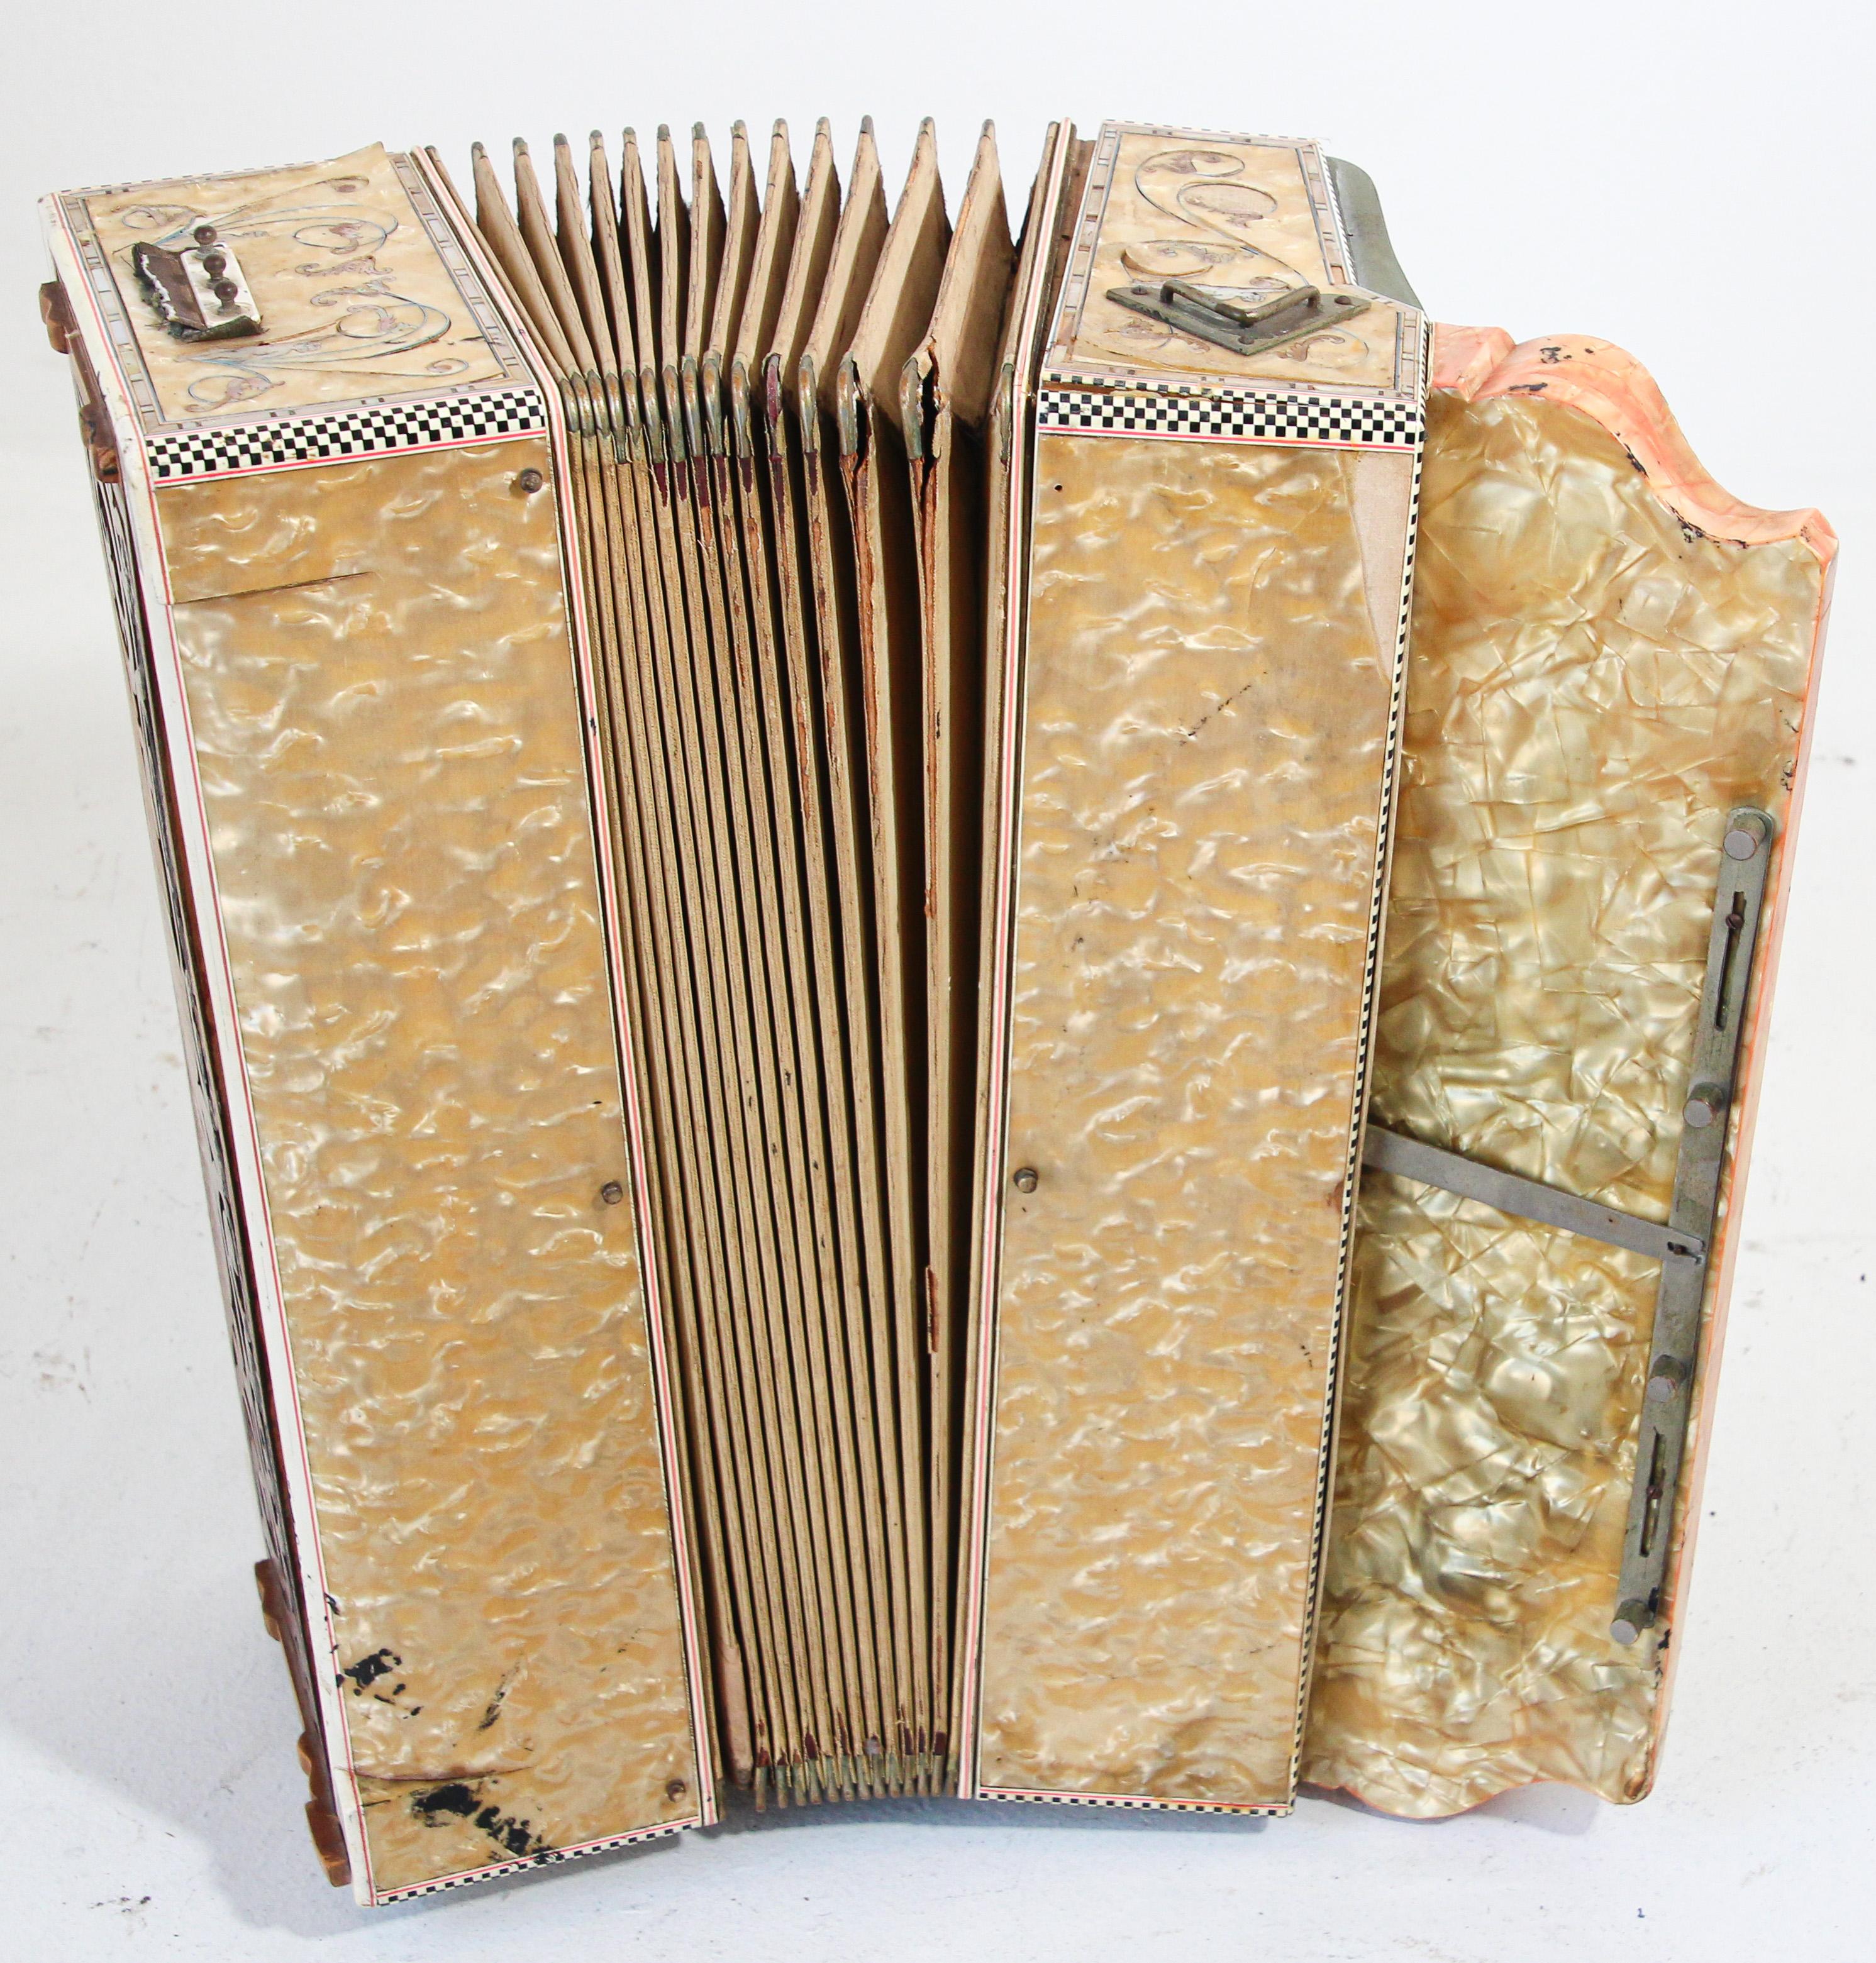 Antique Italian custom made accordion by Sabatino Nocentini Castiglion & Figli.
Antique pearl white accordion, Italian accordion with profuse inlay decoration, gorgeous hand made with customer name, manufacturer name.
A beautiful Art Deco style